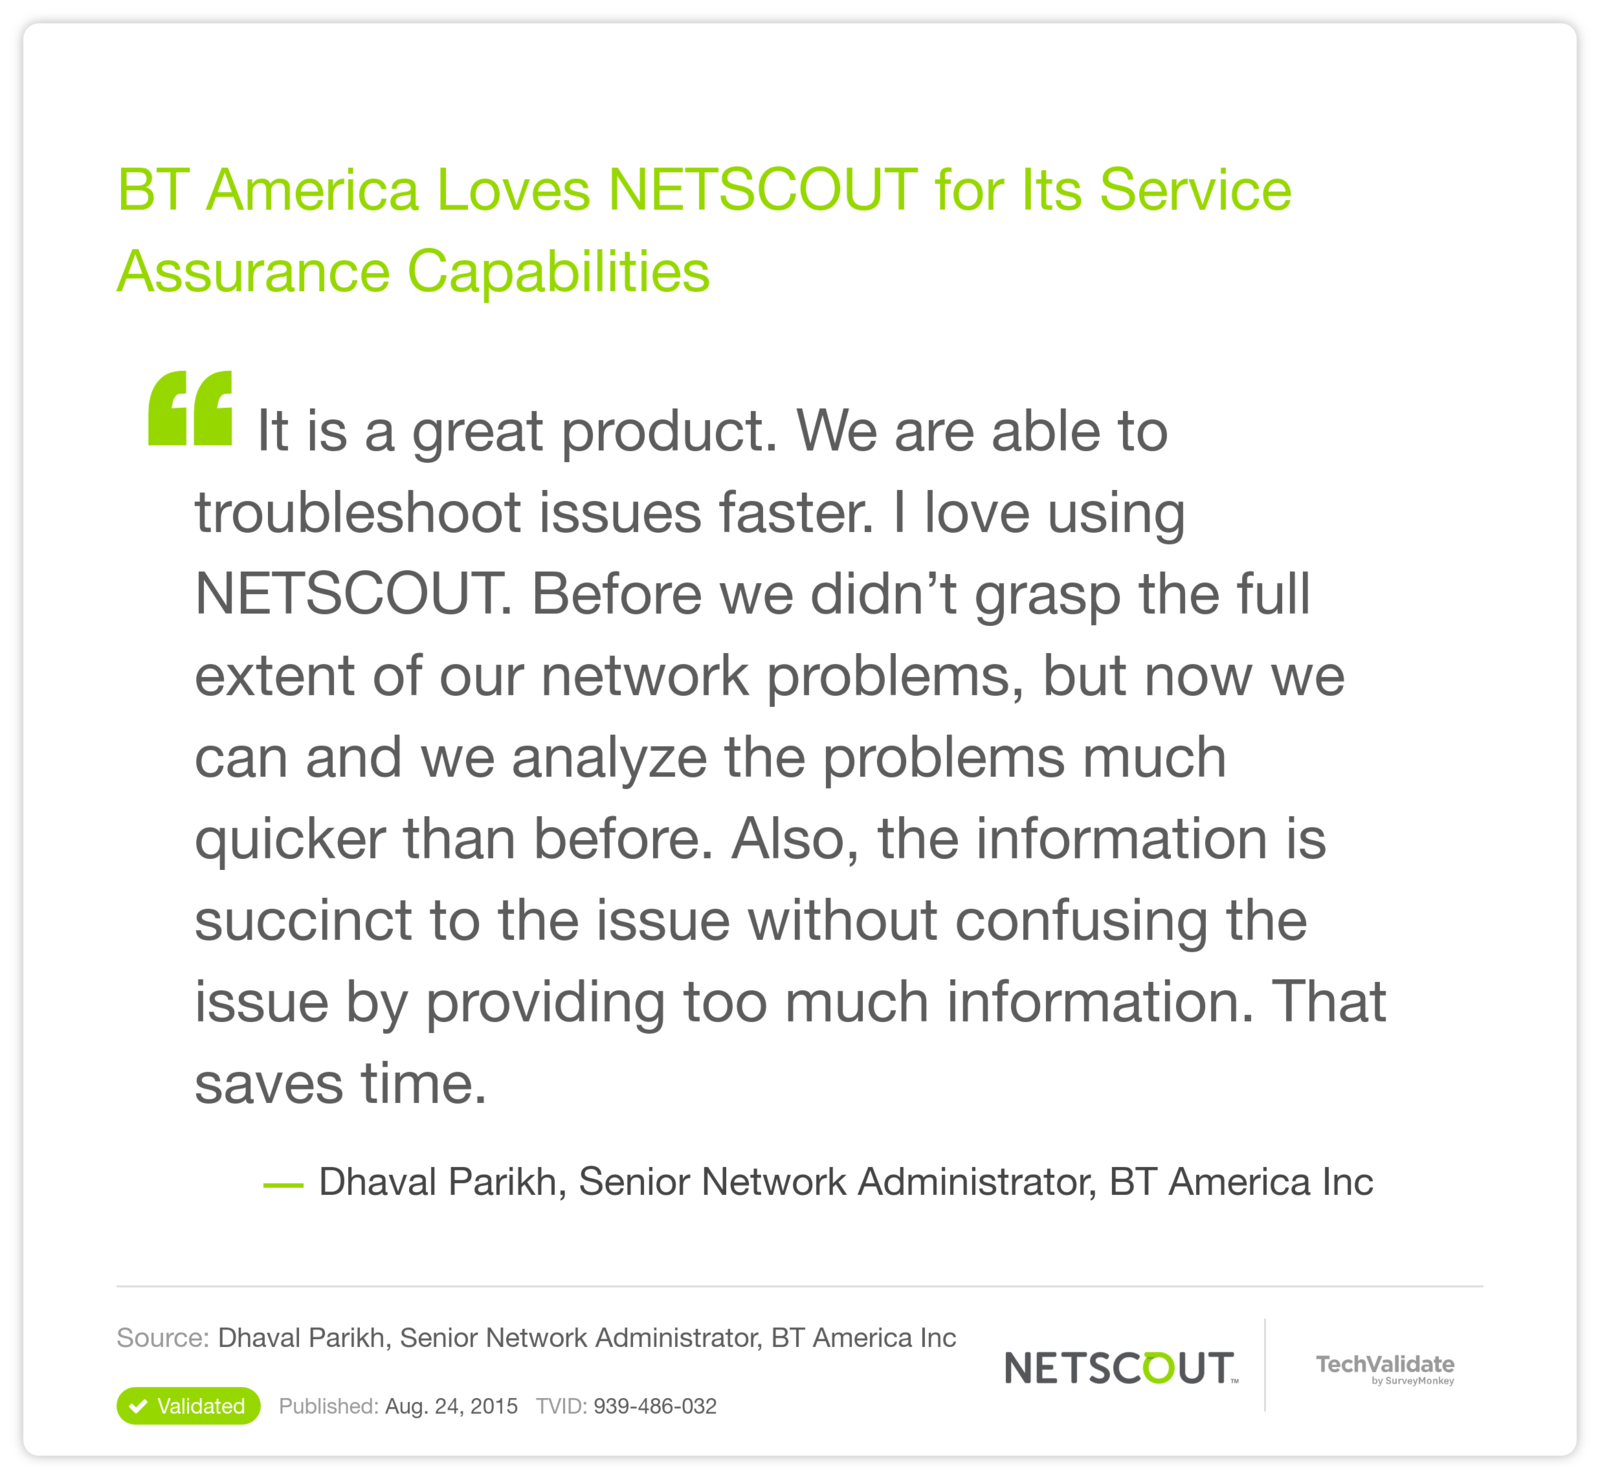 BT America Loves NETSCOUT for Its Service Assurance Capabilities